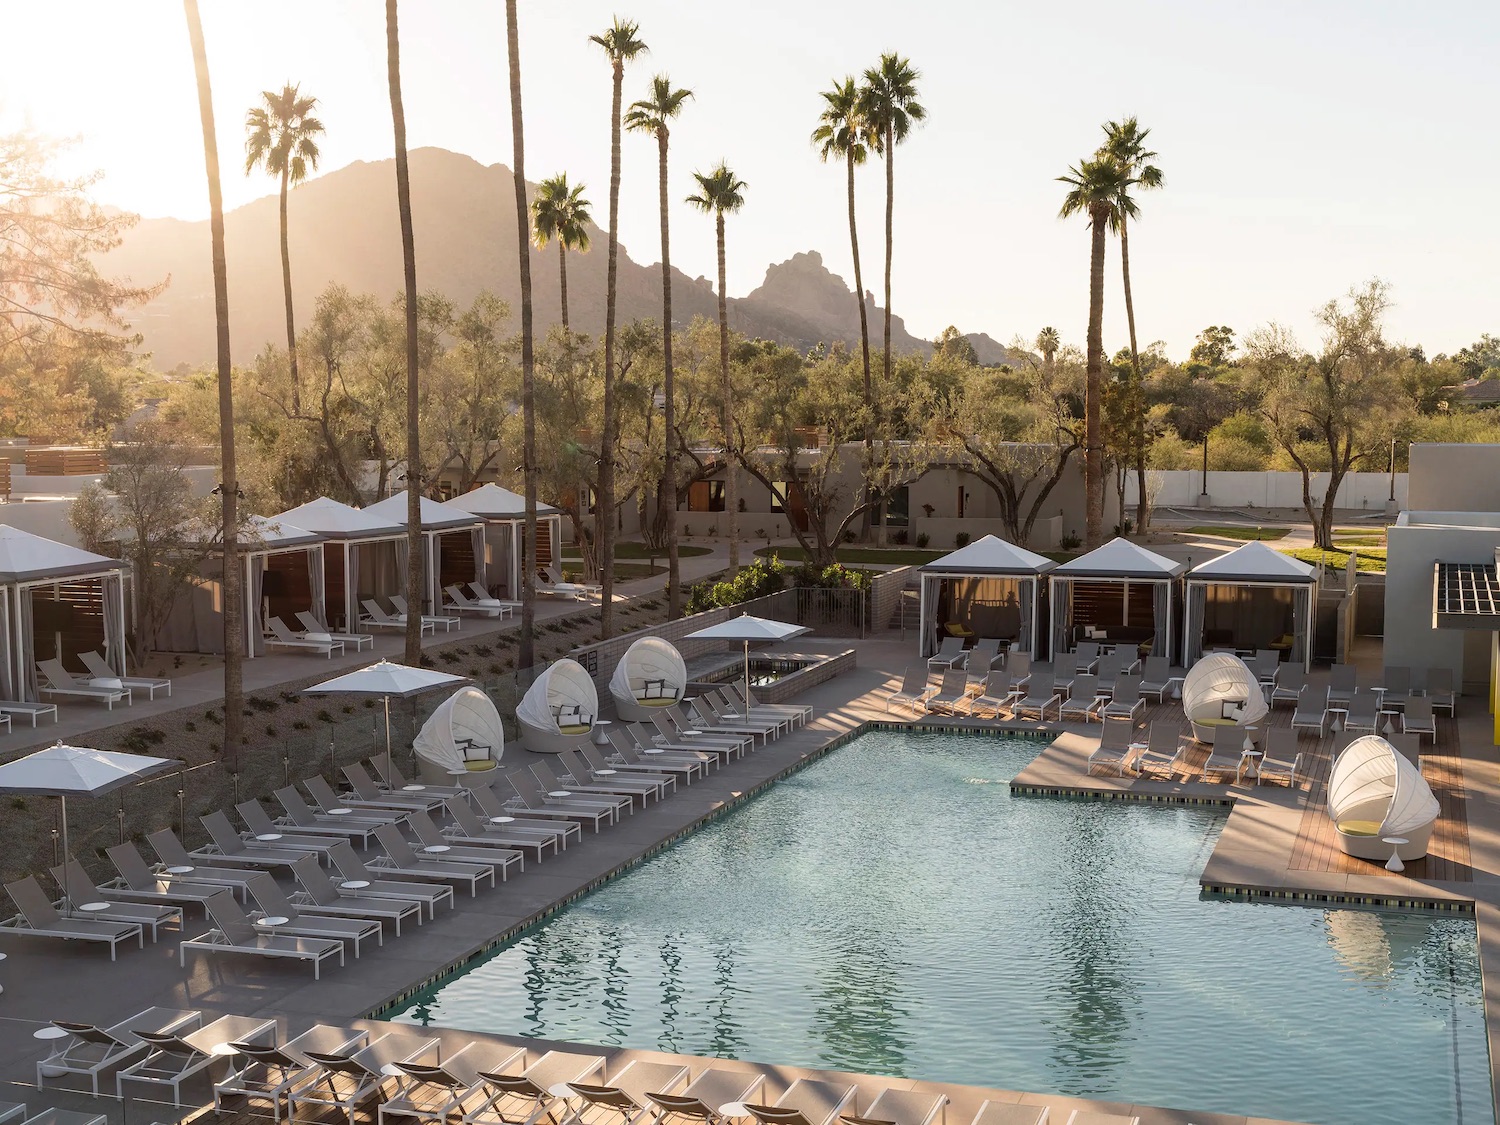 Exterior and pool at the Andaz Scottsdale Resort & Bungalows a popular travel destination in Arizona